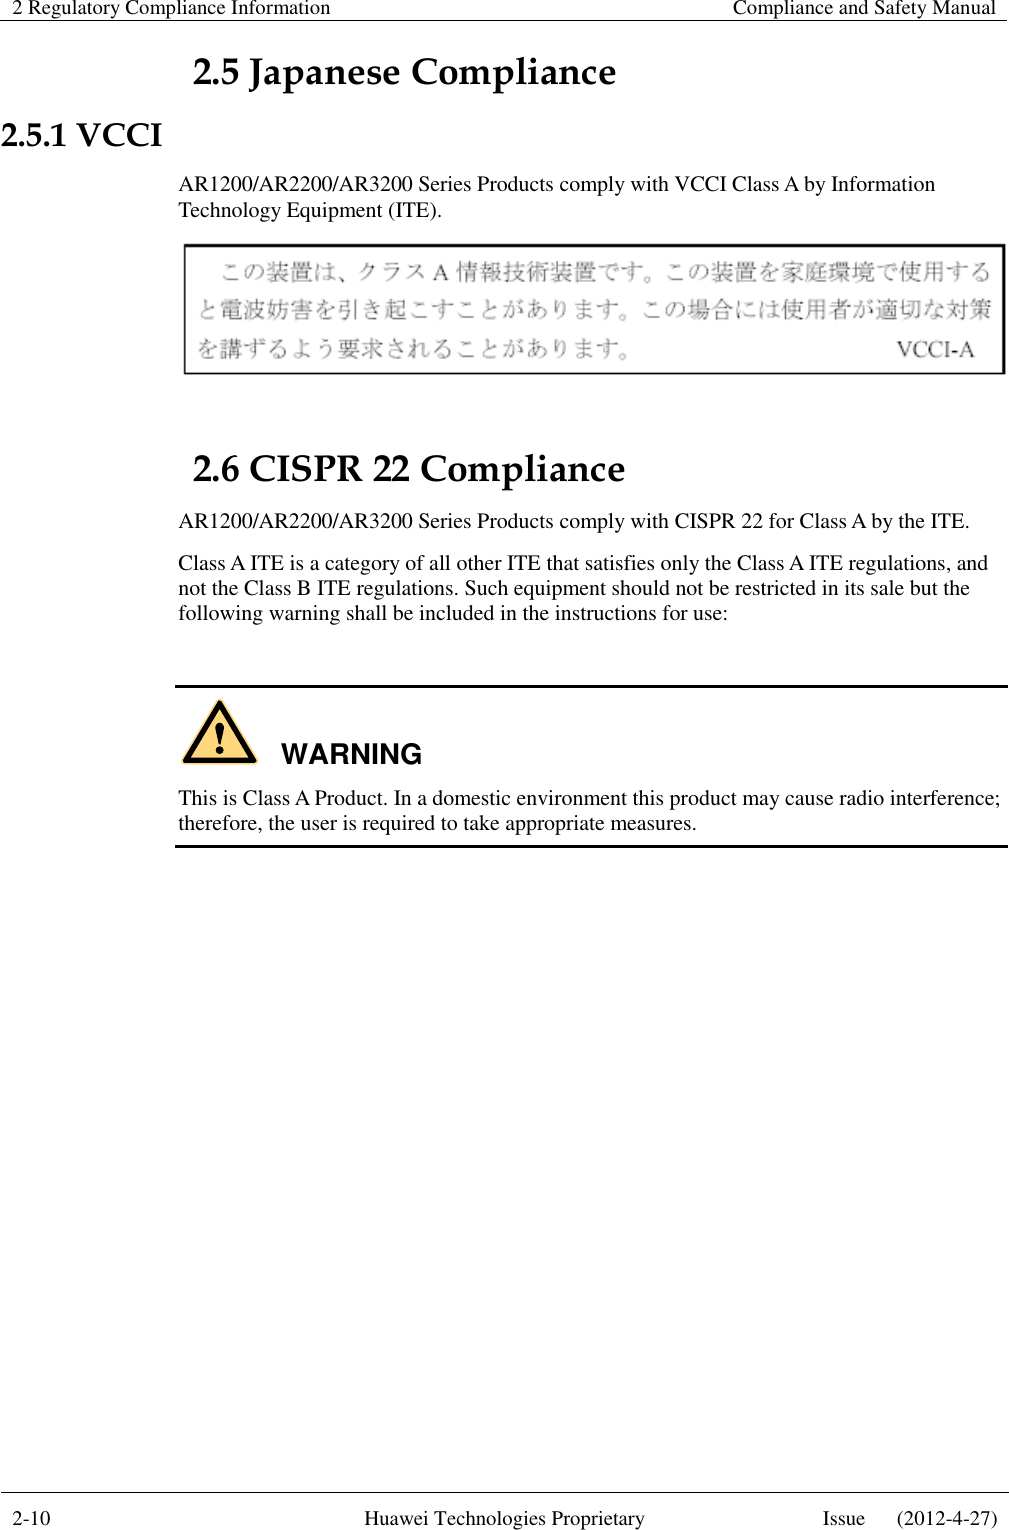 2 Regulatory Compliance Information    Compliance and Safety Manual  2-10 Huawei Technologies Proprietary Issue      (2012-4-27)  2.5 Japanese Compliance 2.5.1 VCCI AR1200/AR2200/AR3200 Series Products comply with VCCI Class A by Information Technology Equipment (ITE).    2.6 CISPR 22 Compliance AR1200/AR2200/AR3200 Series Products comply with CISPR 22 for Class A by the ITE.   Class A ITE is a category of all other ITE that satisfies only the Class A ITE regulations, and not the Class B ITE regulations. Such equipment should not be restricted in its sale but the following warning shall be included in the instructions for use:  WARNING This is Class A Product. In a domestic environment this product may cause radio interference; therefore, the user is required to take appropriate measures. 